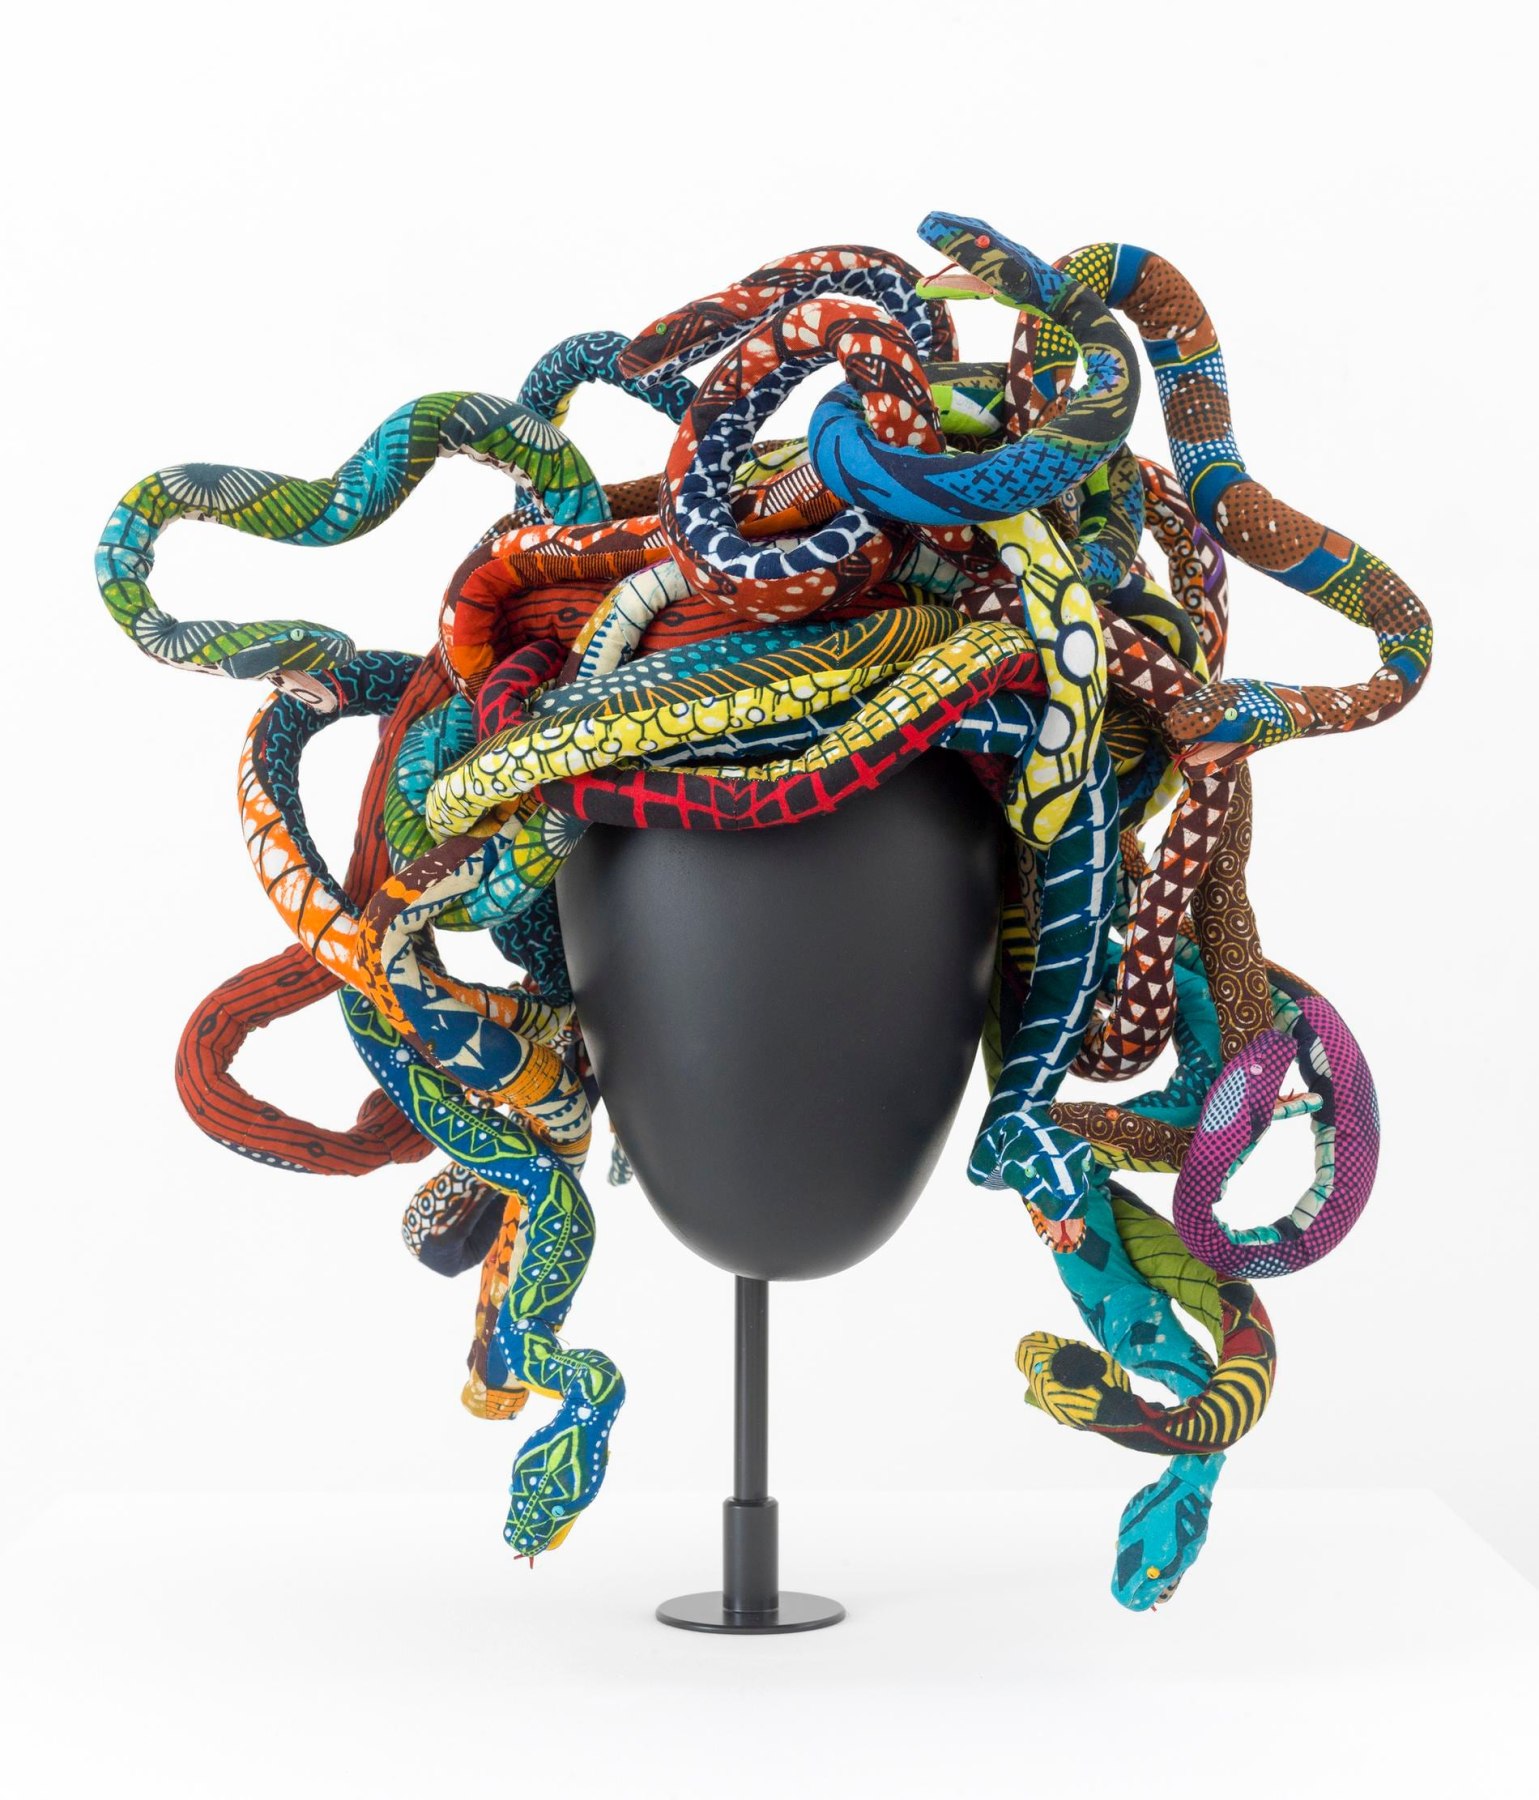 Medusa headpiece made up of many colorful snakes